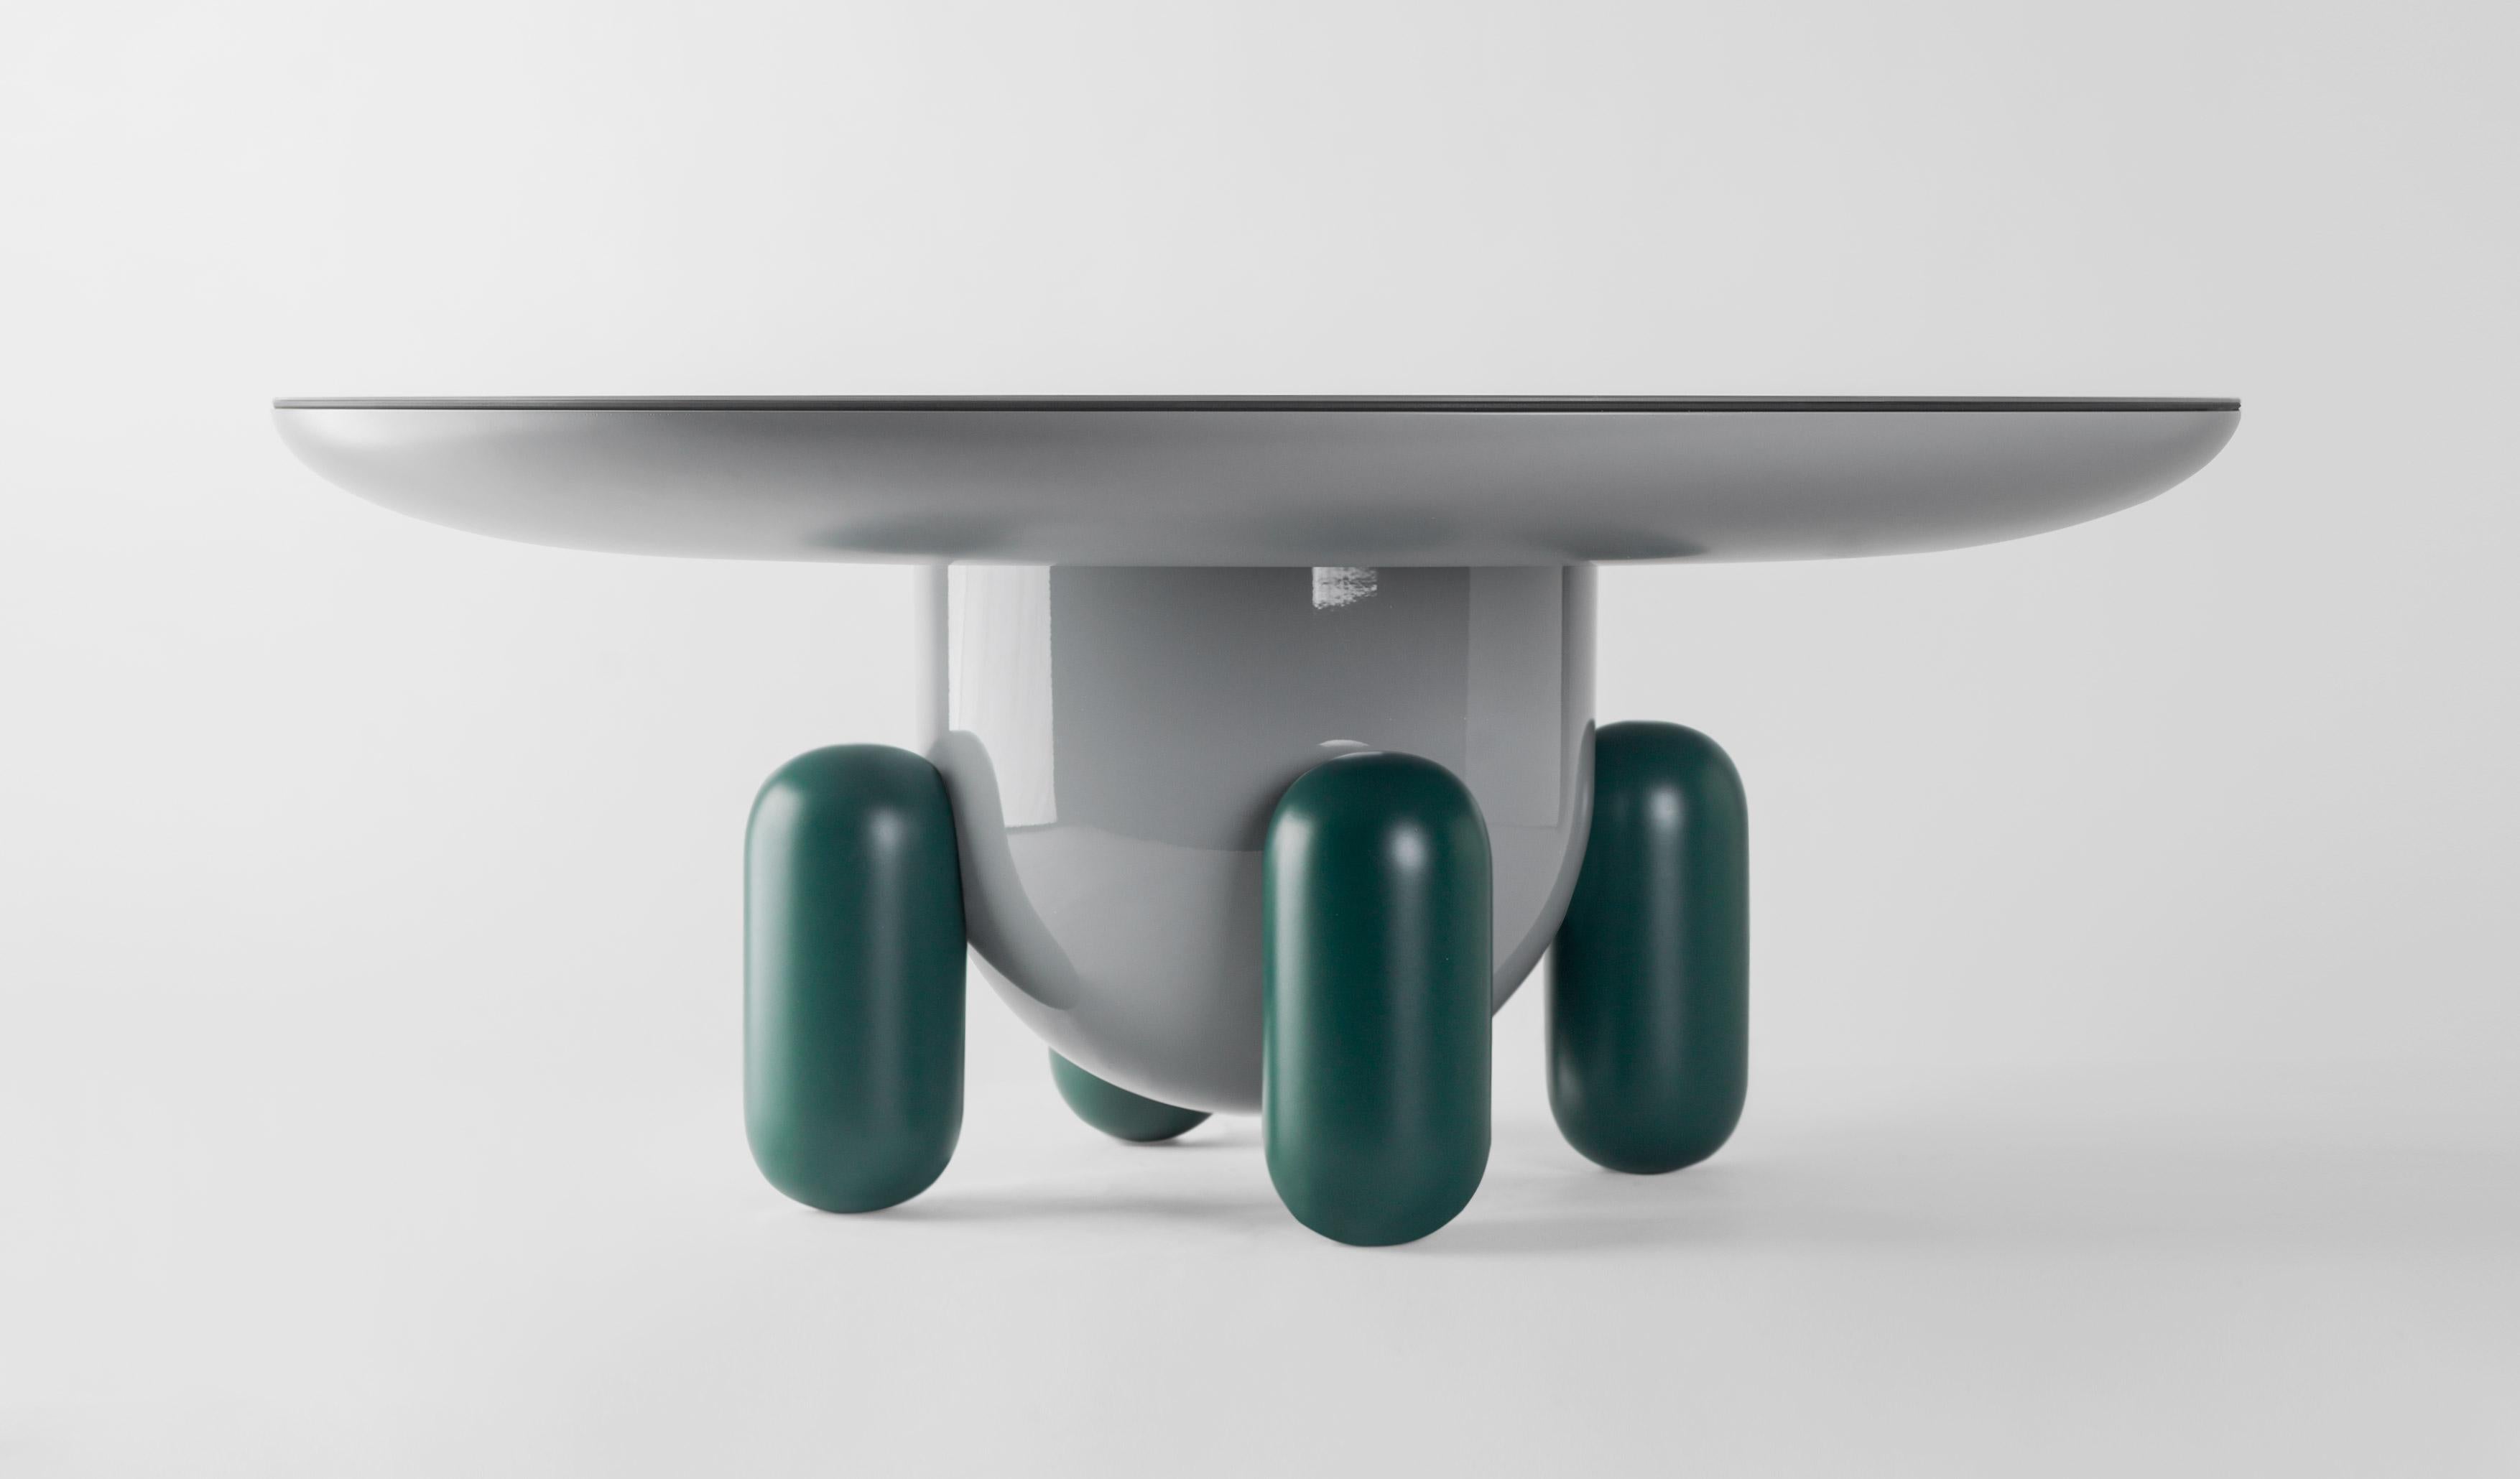 Explorer Table Model 100 designed by Jaime Hayon for BD Barcelona creates an elegant beauty where it is placed. Spanish artist-designer Jaime Hayon is one of the most acclaimed creators worldwide. Hayon’s esteem and knowledge of artisan skills and